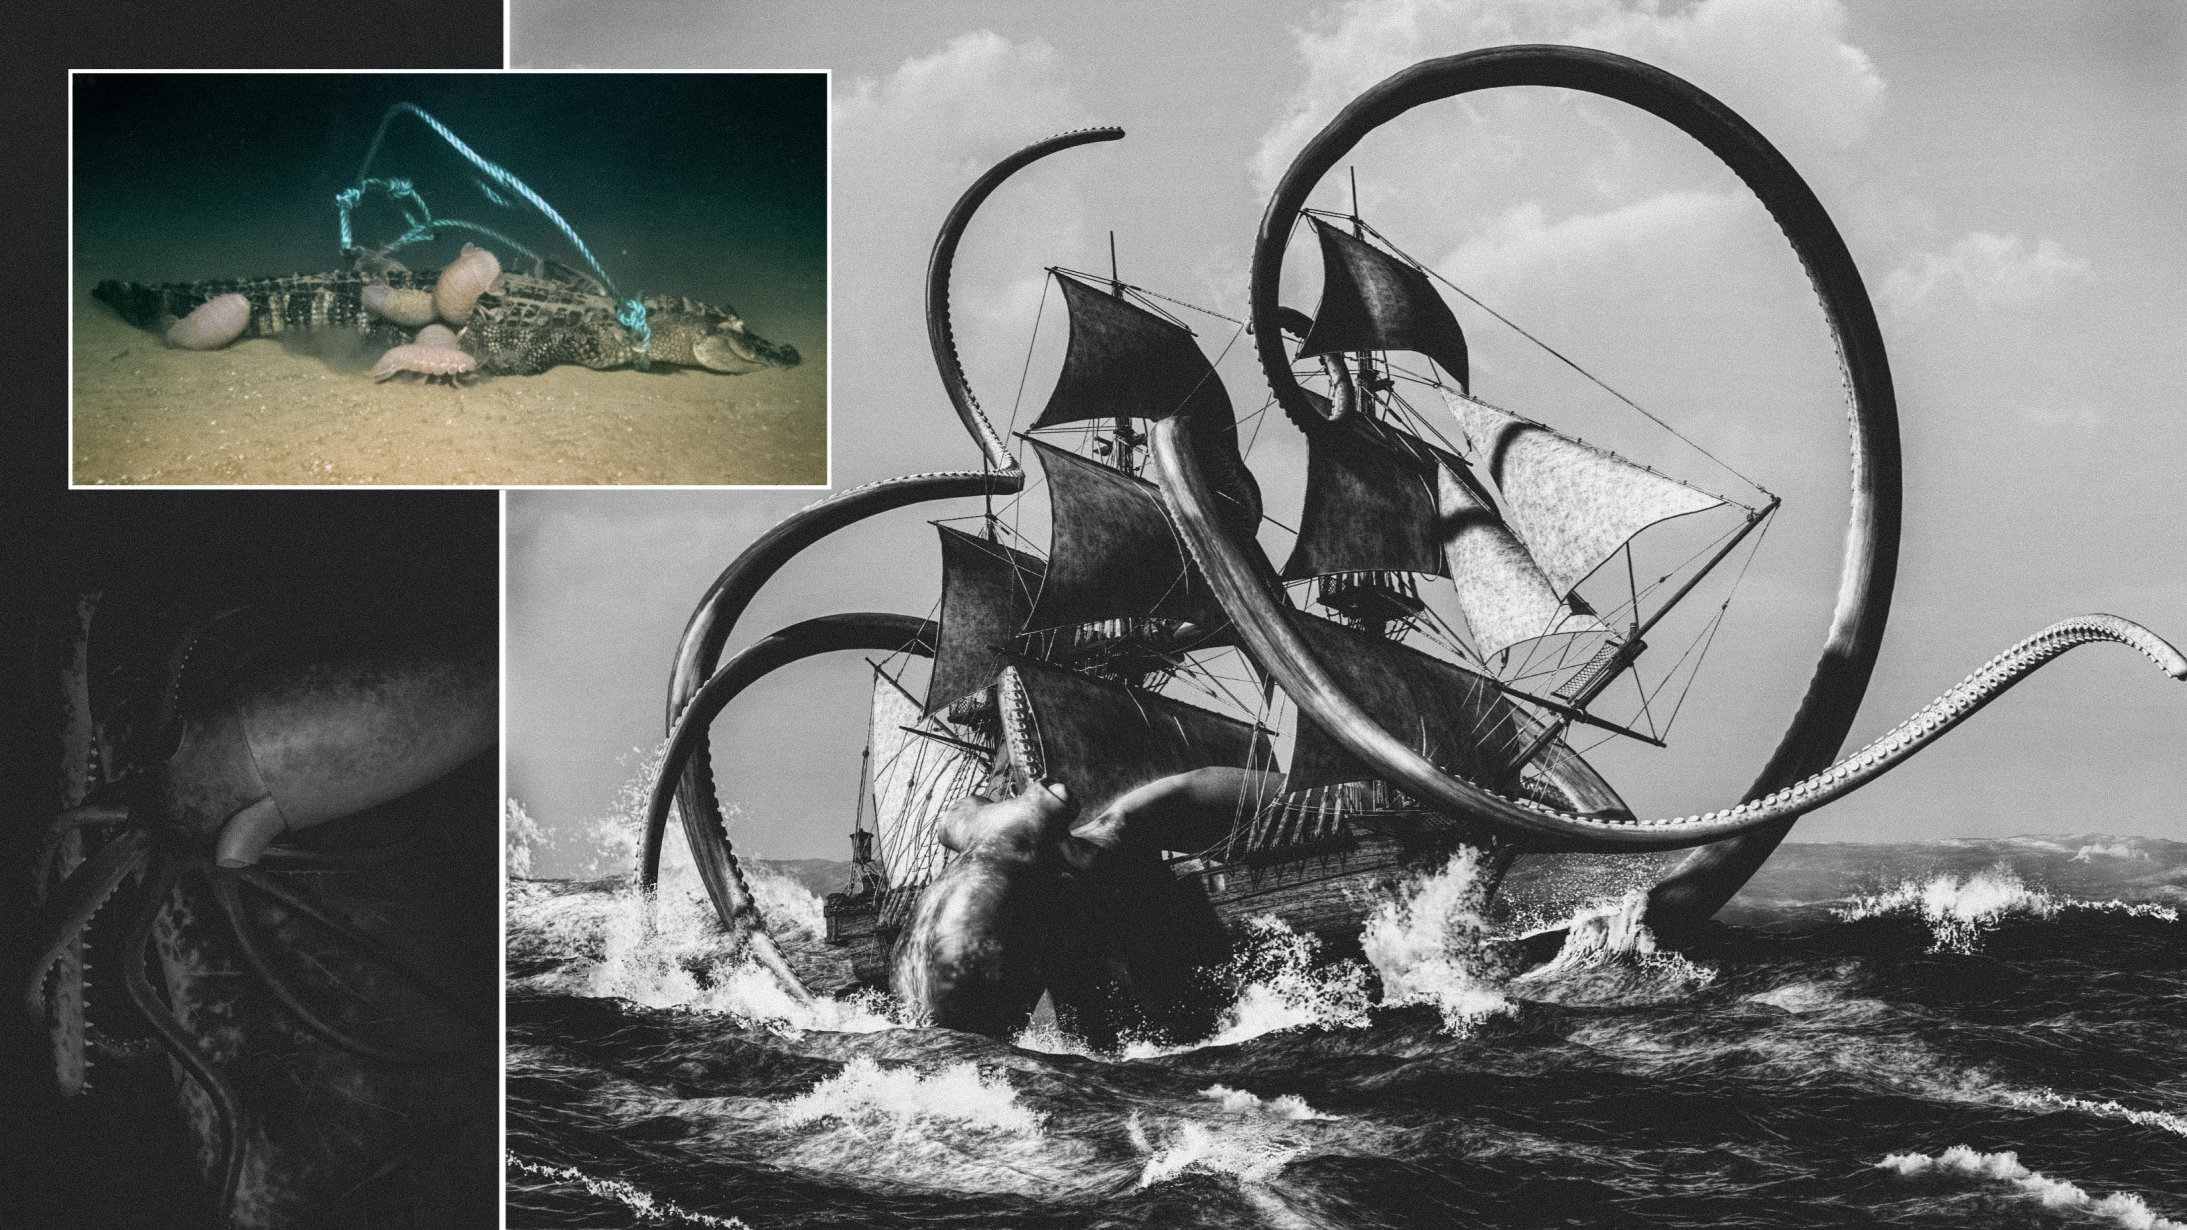 Could Kraken really exist? Scientists sank three dead alligators deep into the sea, one of them left behind only scary explanations! 2